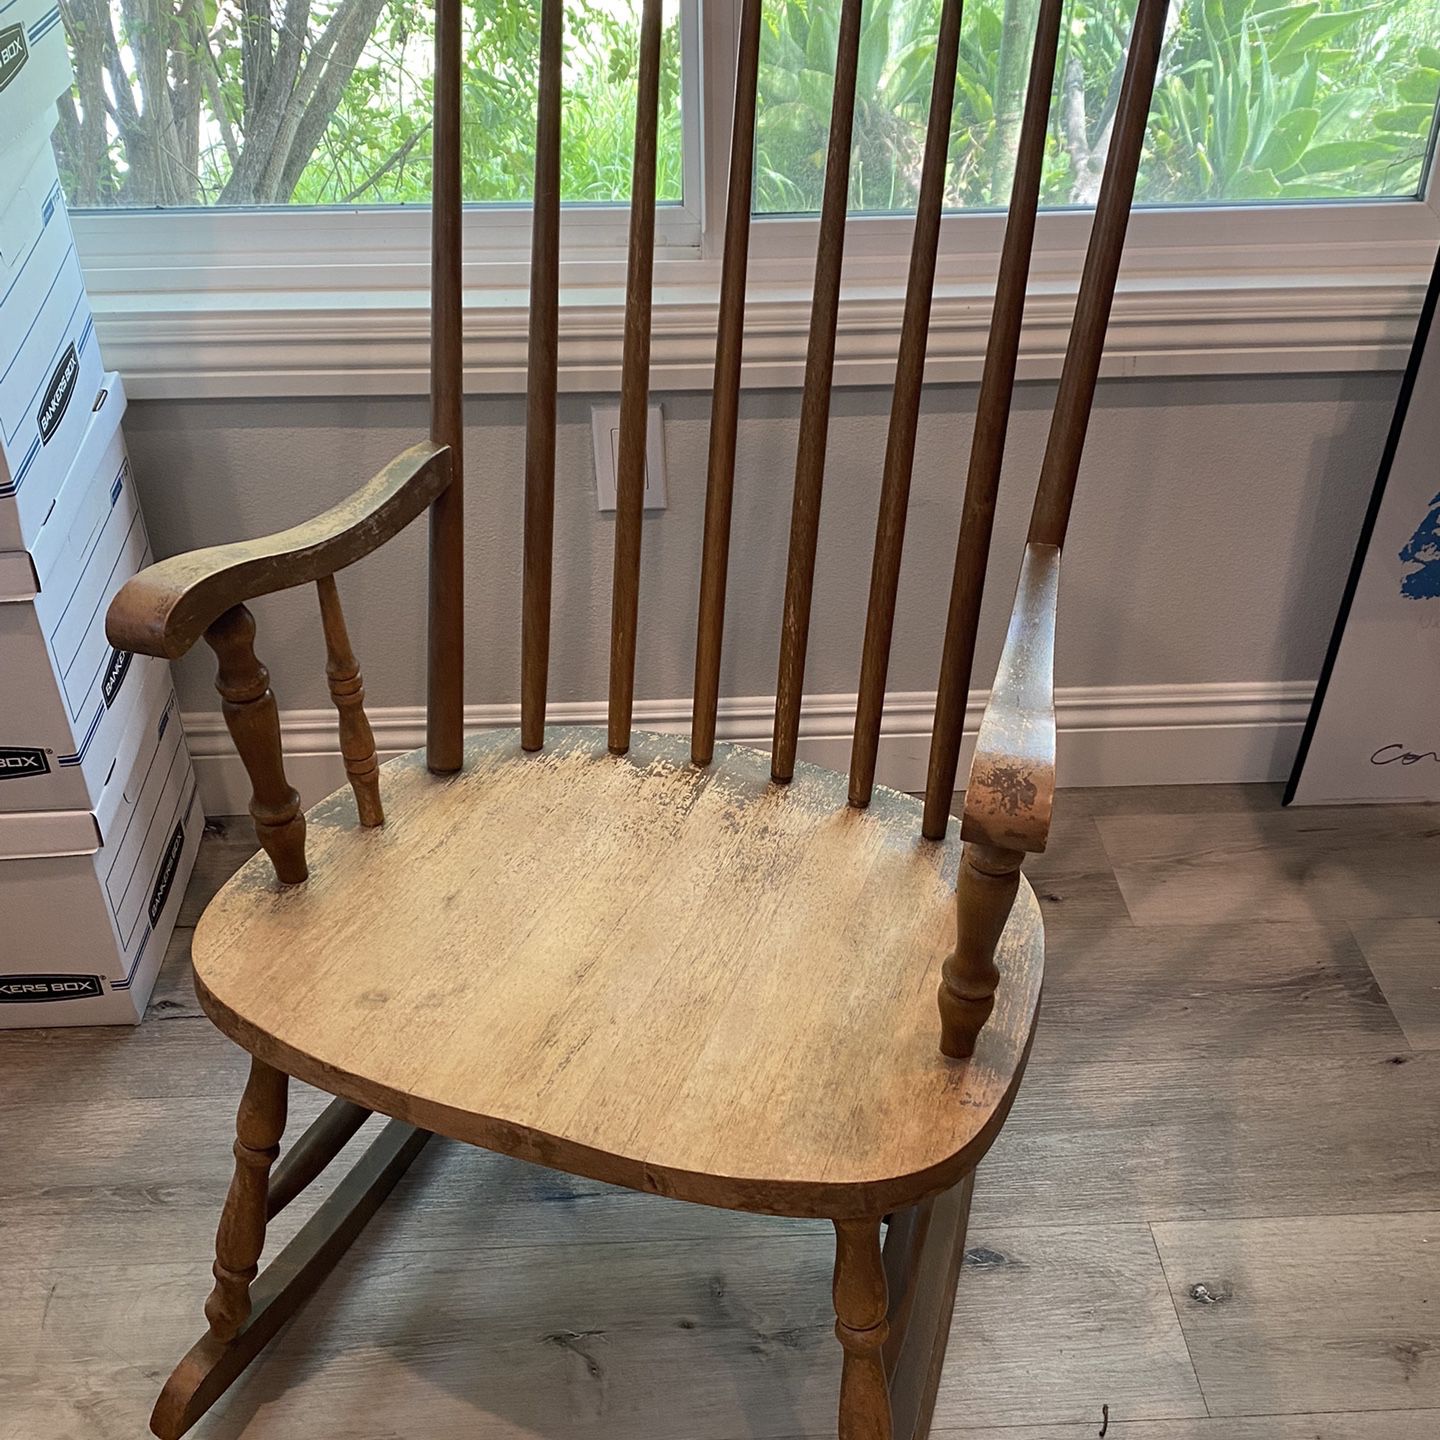 Real Wood Rocking Chair Antique 